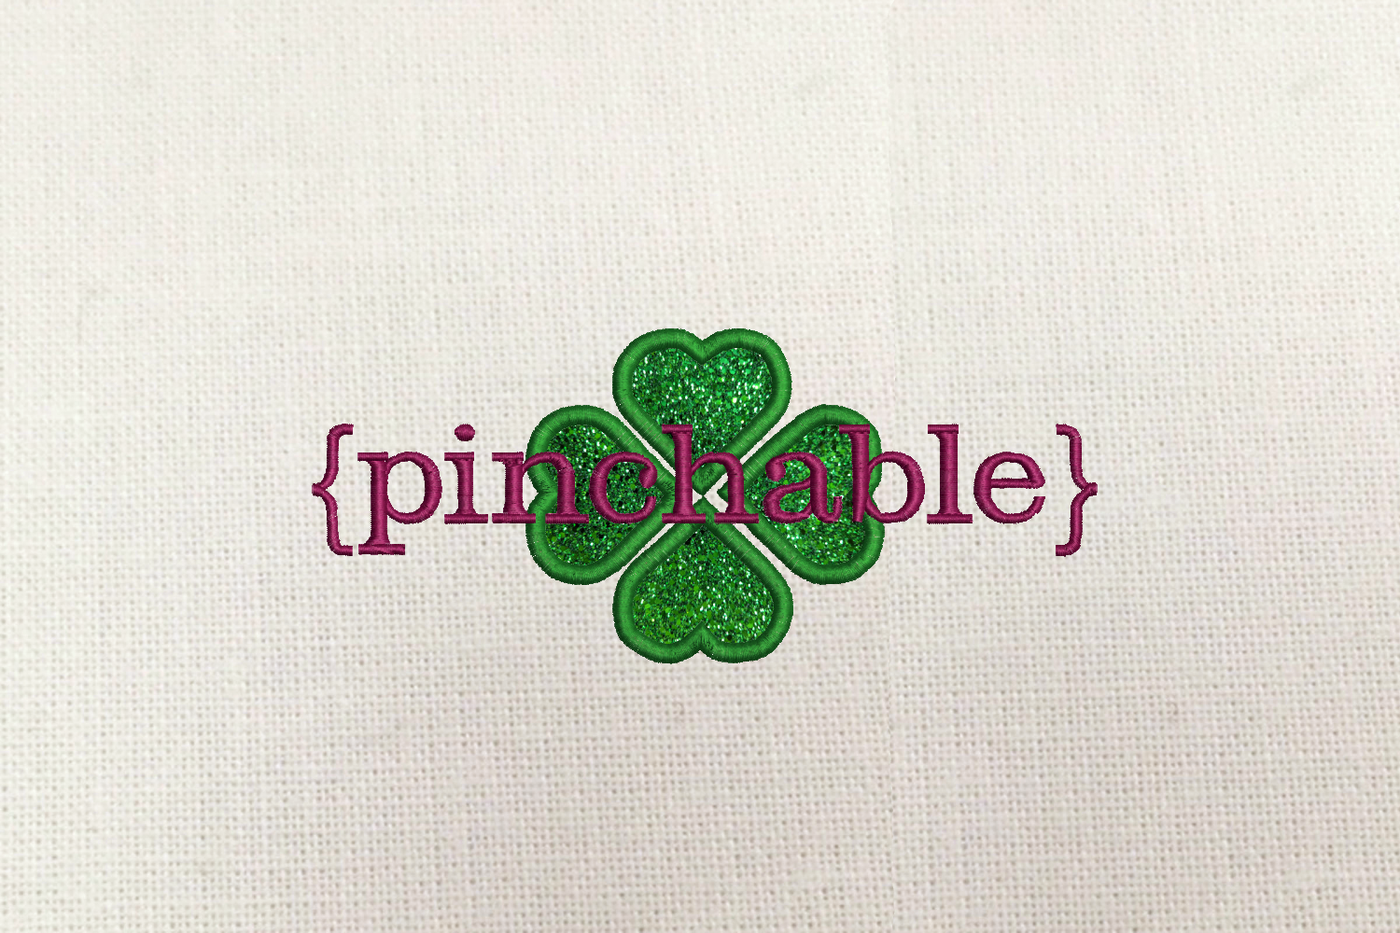 Pinchable embroidery design with an applique shamrock